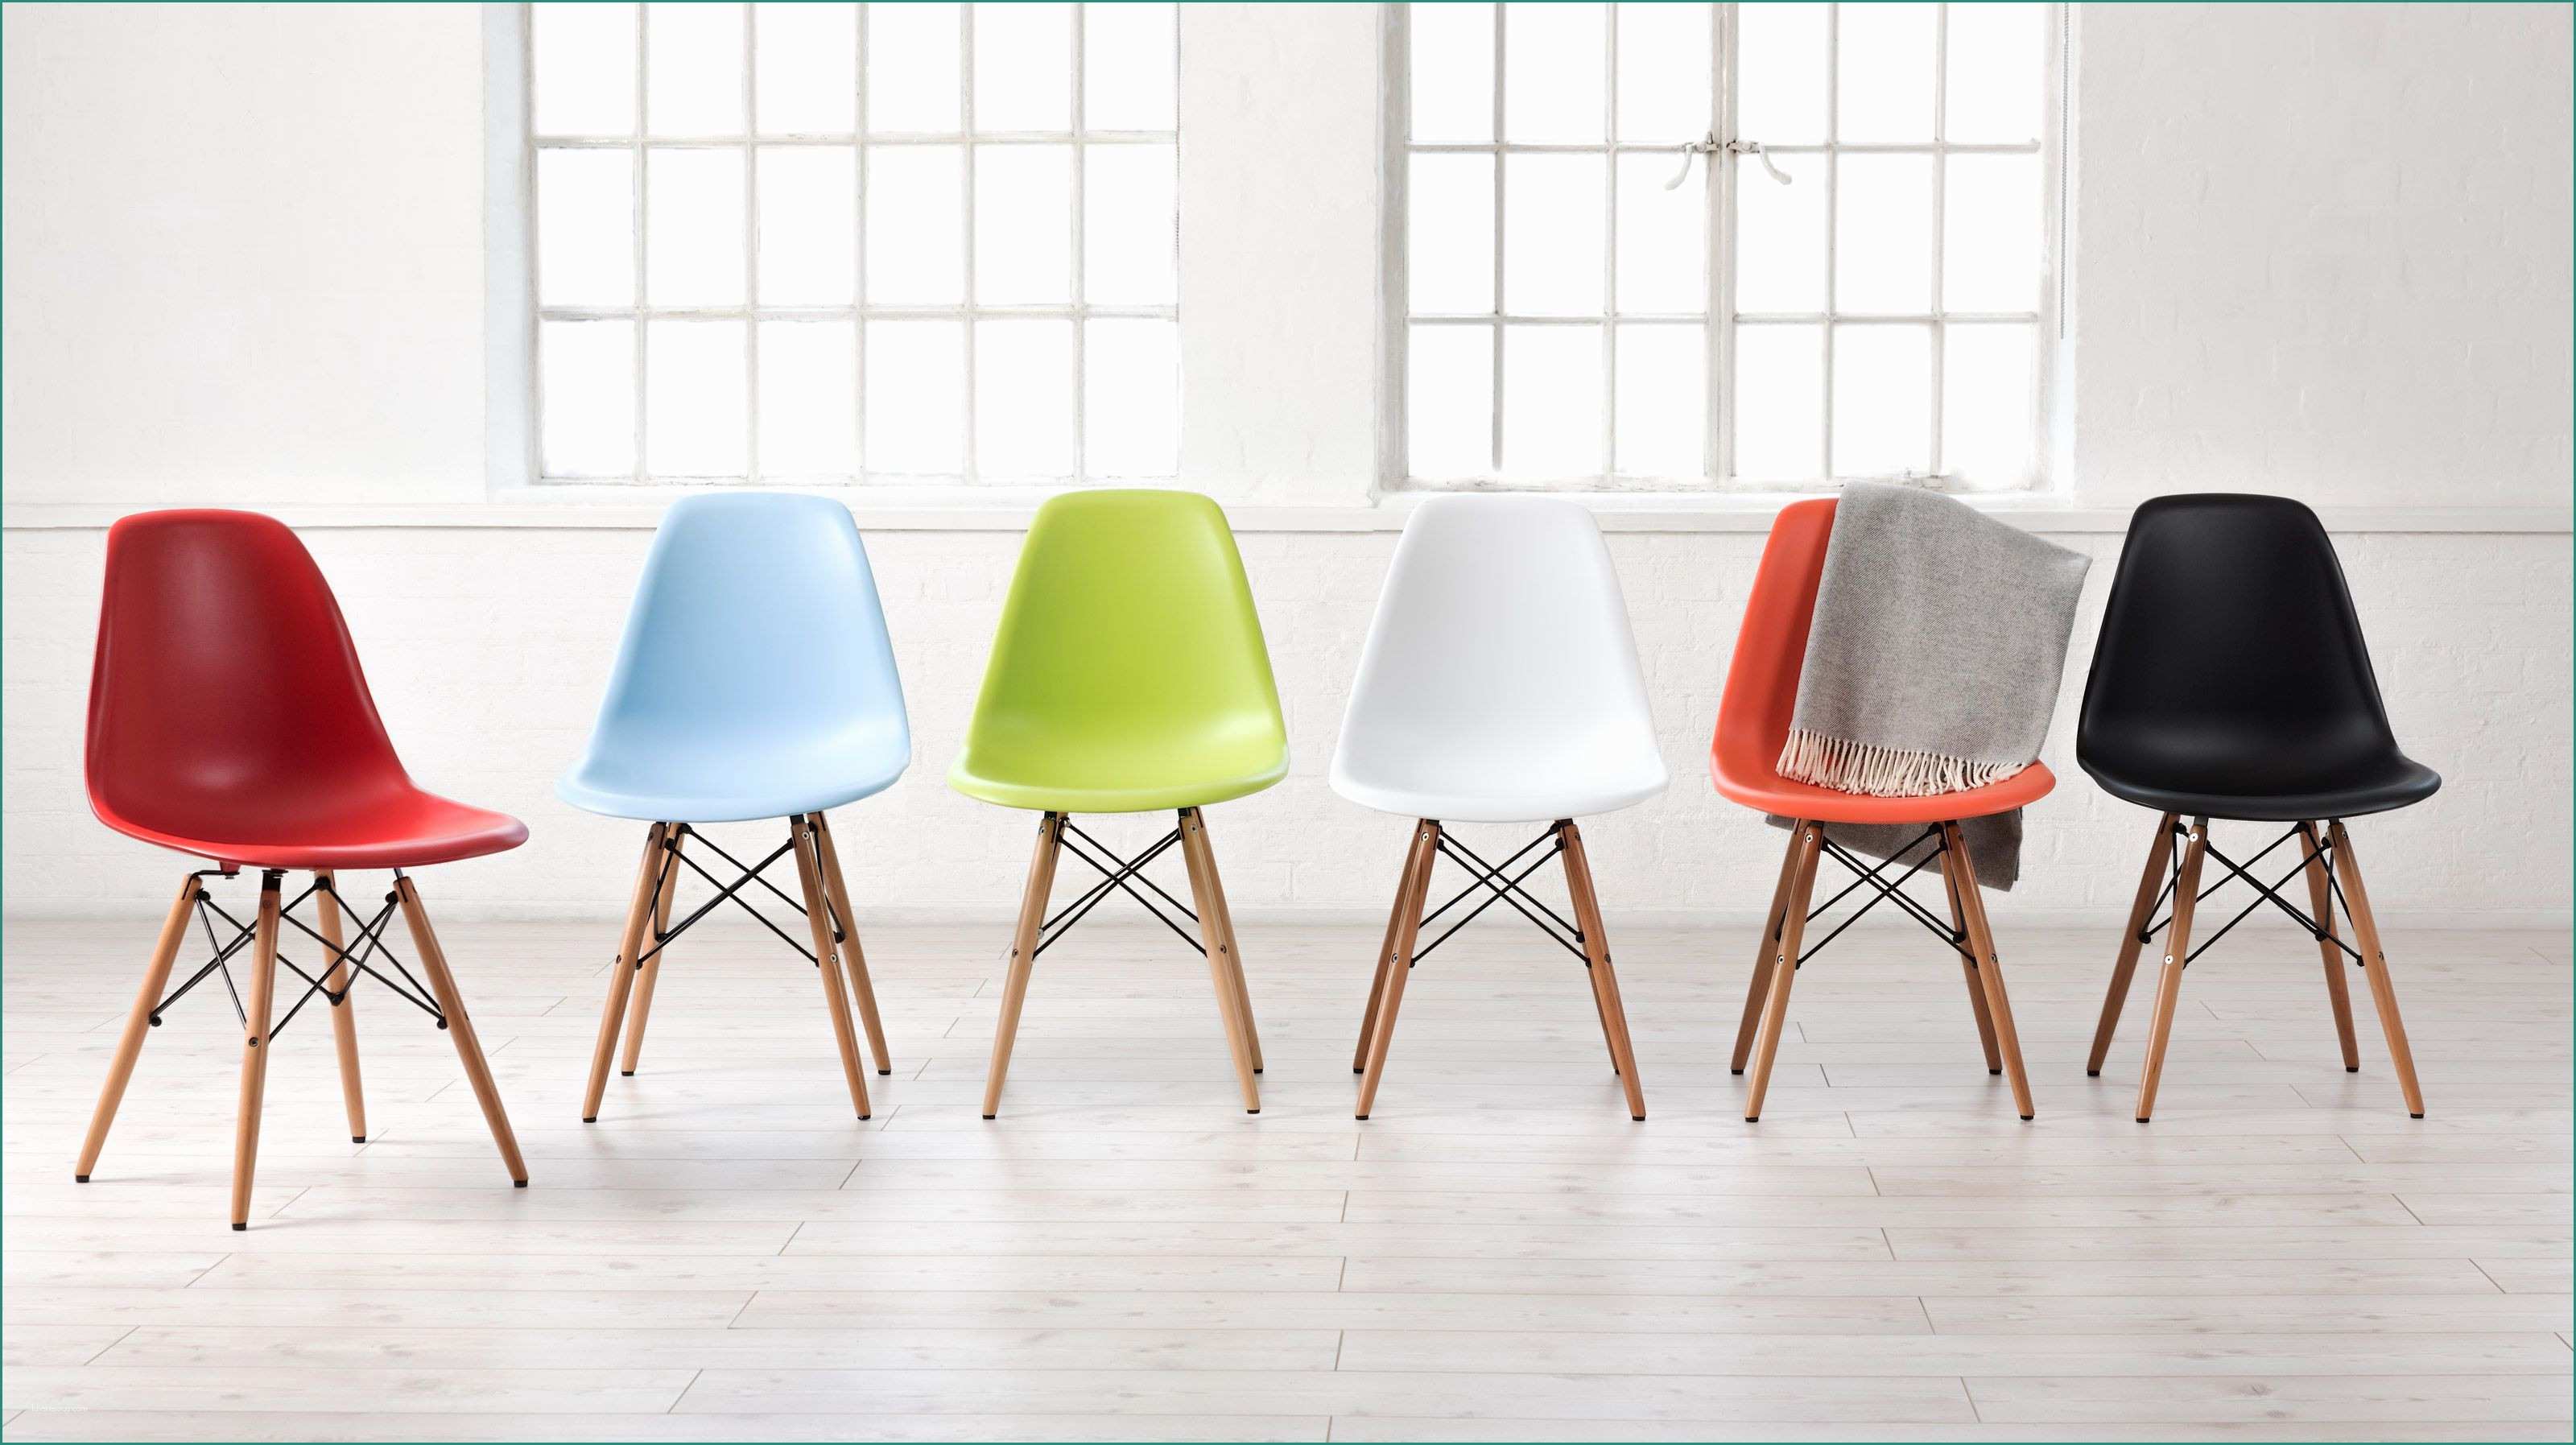 Eames Chair Dsw E Eames Chair Dsw Bestsellers Design Ideas Furniture Styles